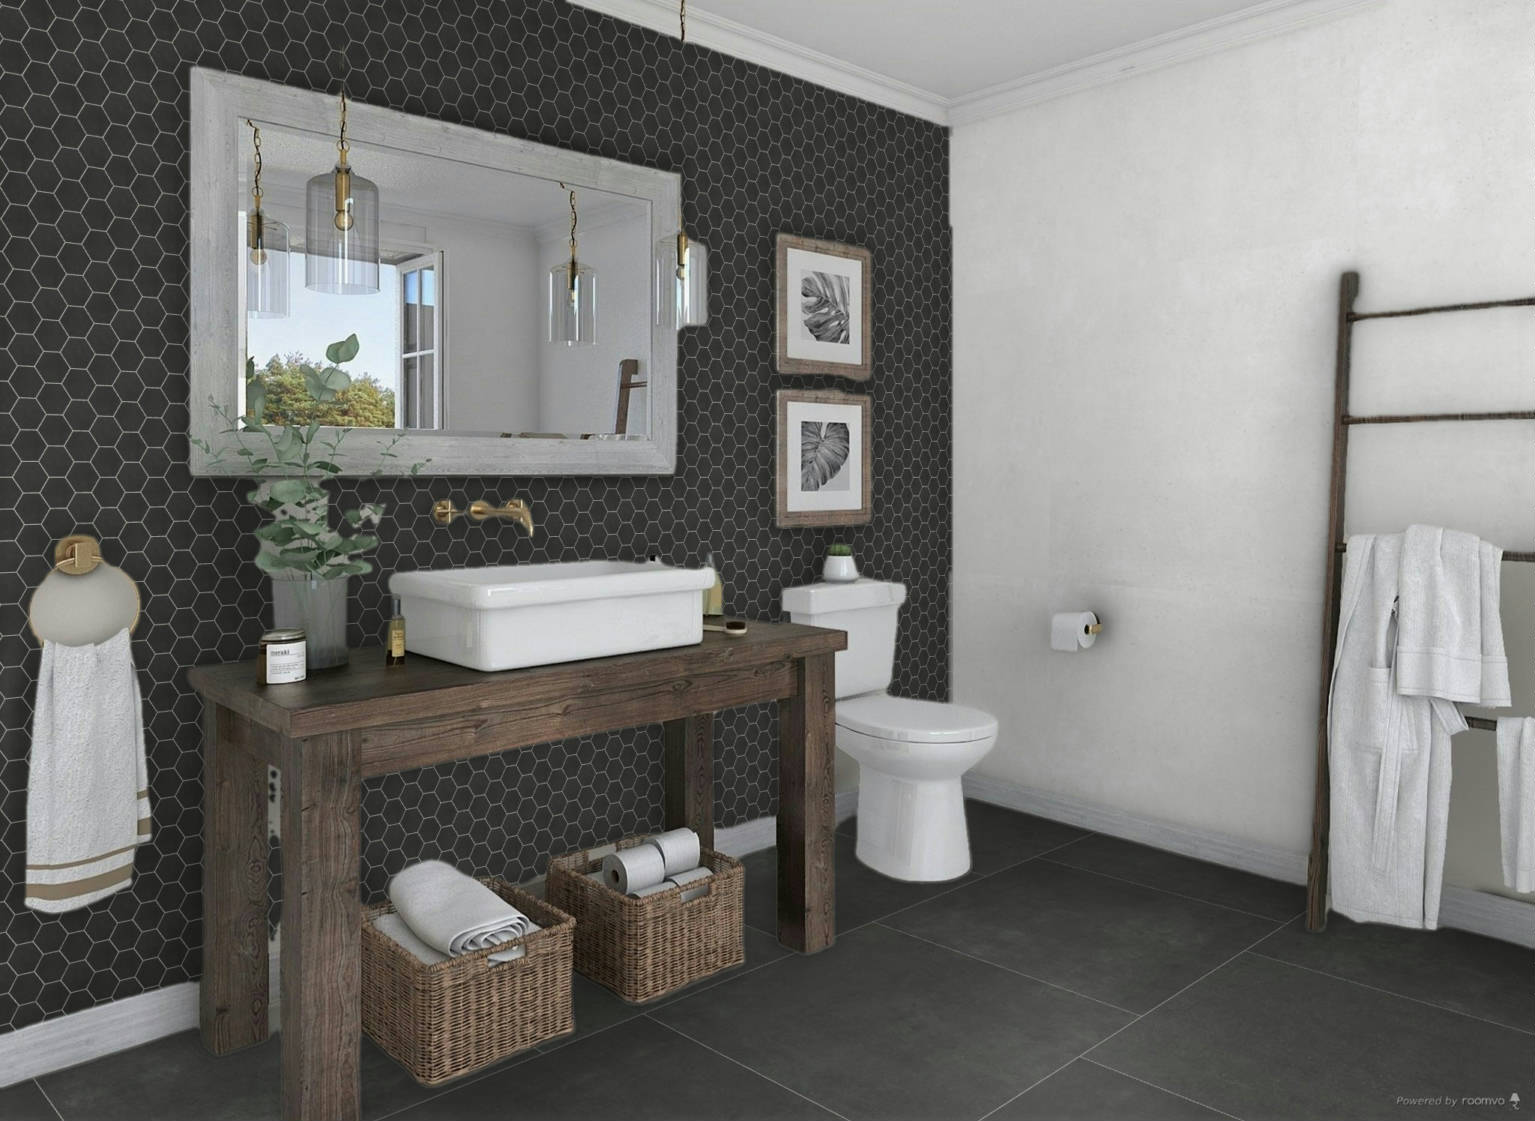 Ashland Ashland 36X36" and 3X3" Mosaic Black | Qualis Ceramica | Luxury Tile and Vinyl at affordable prices